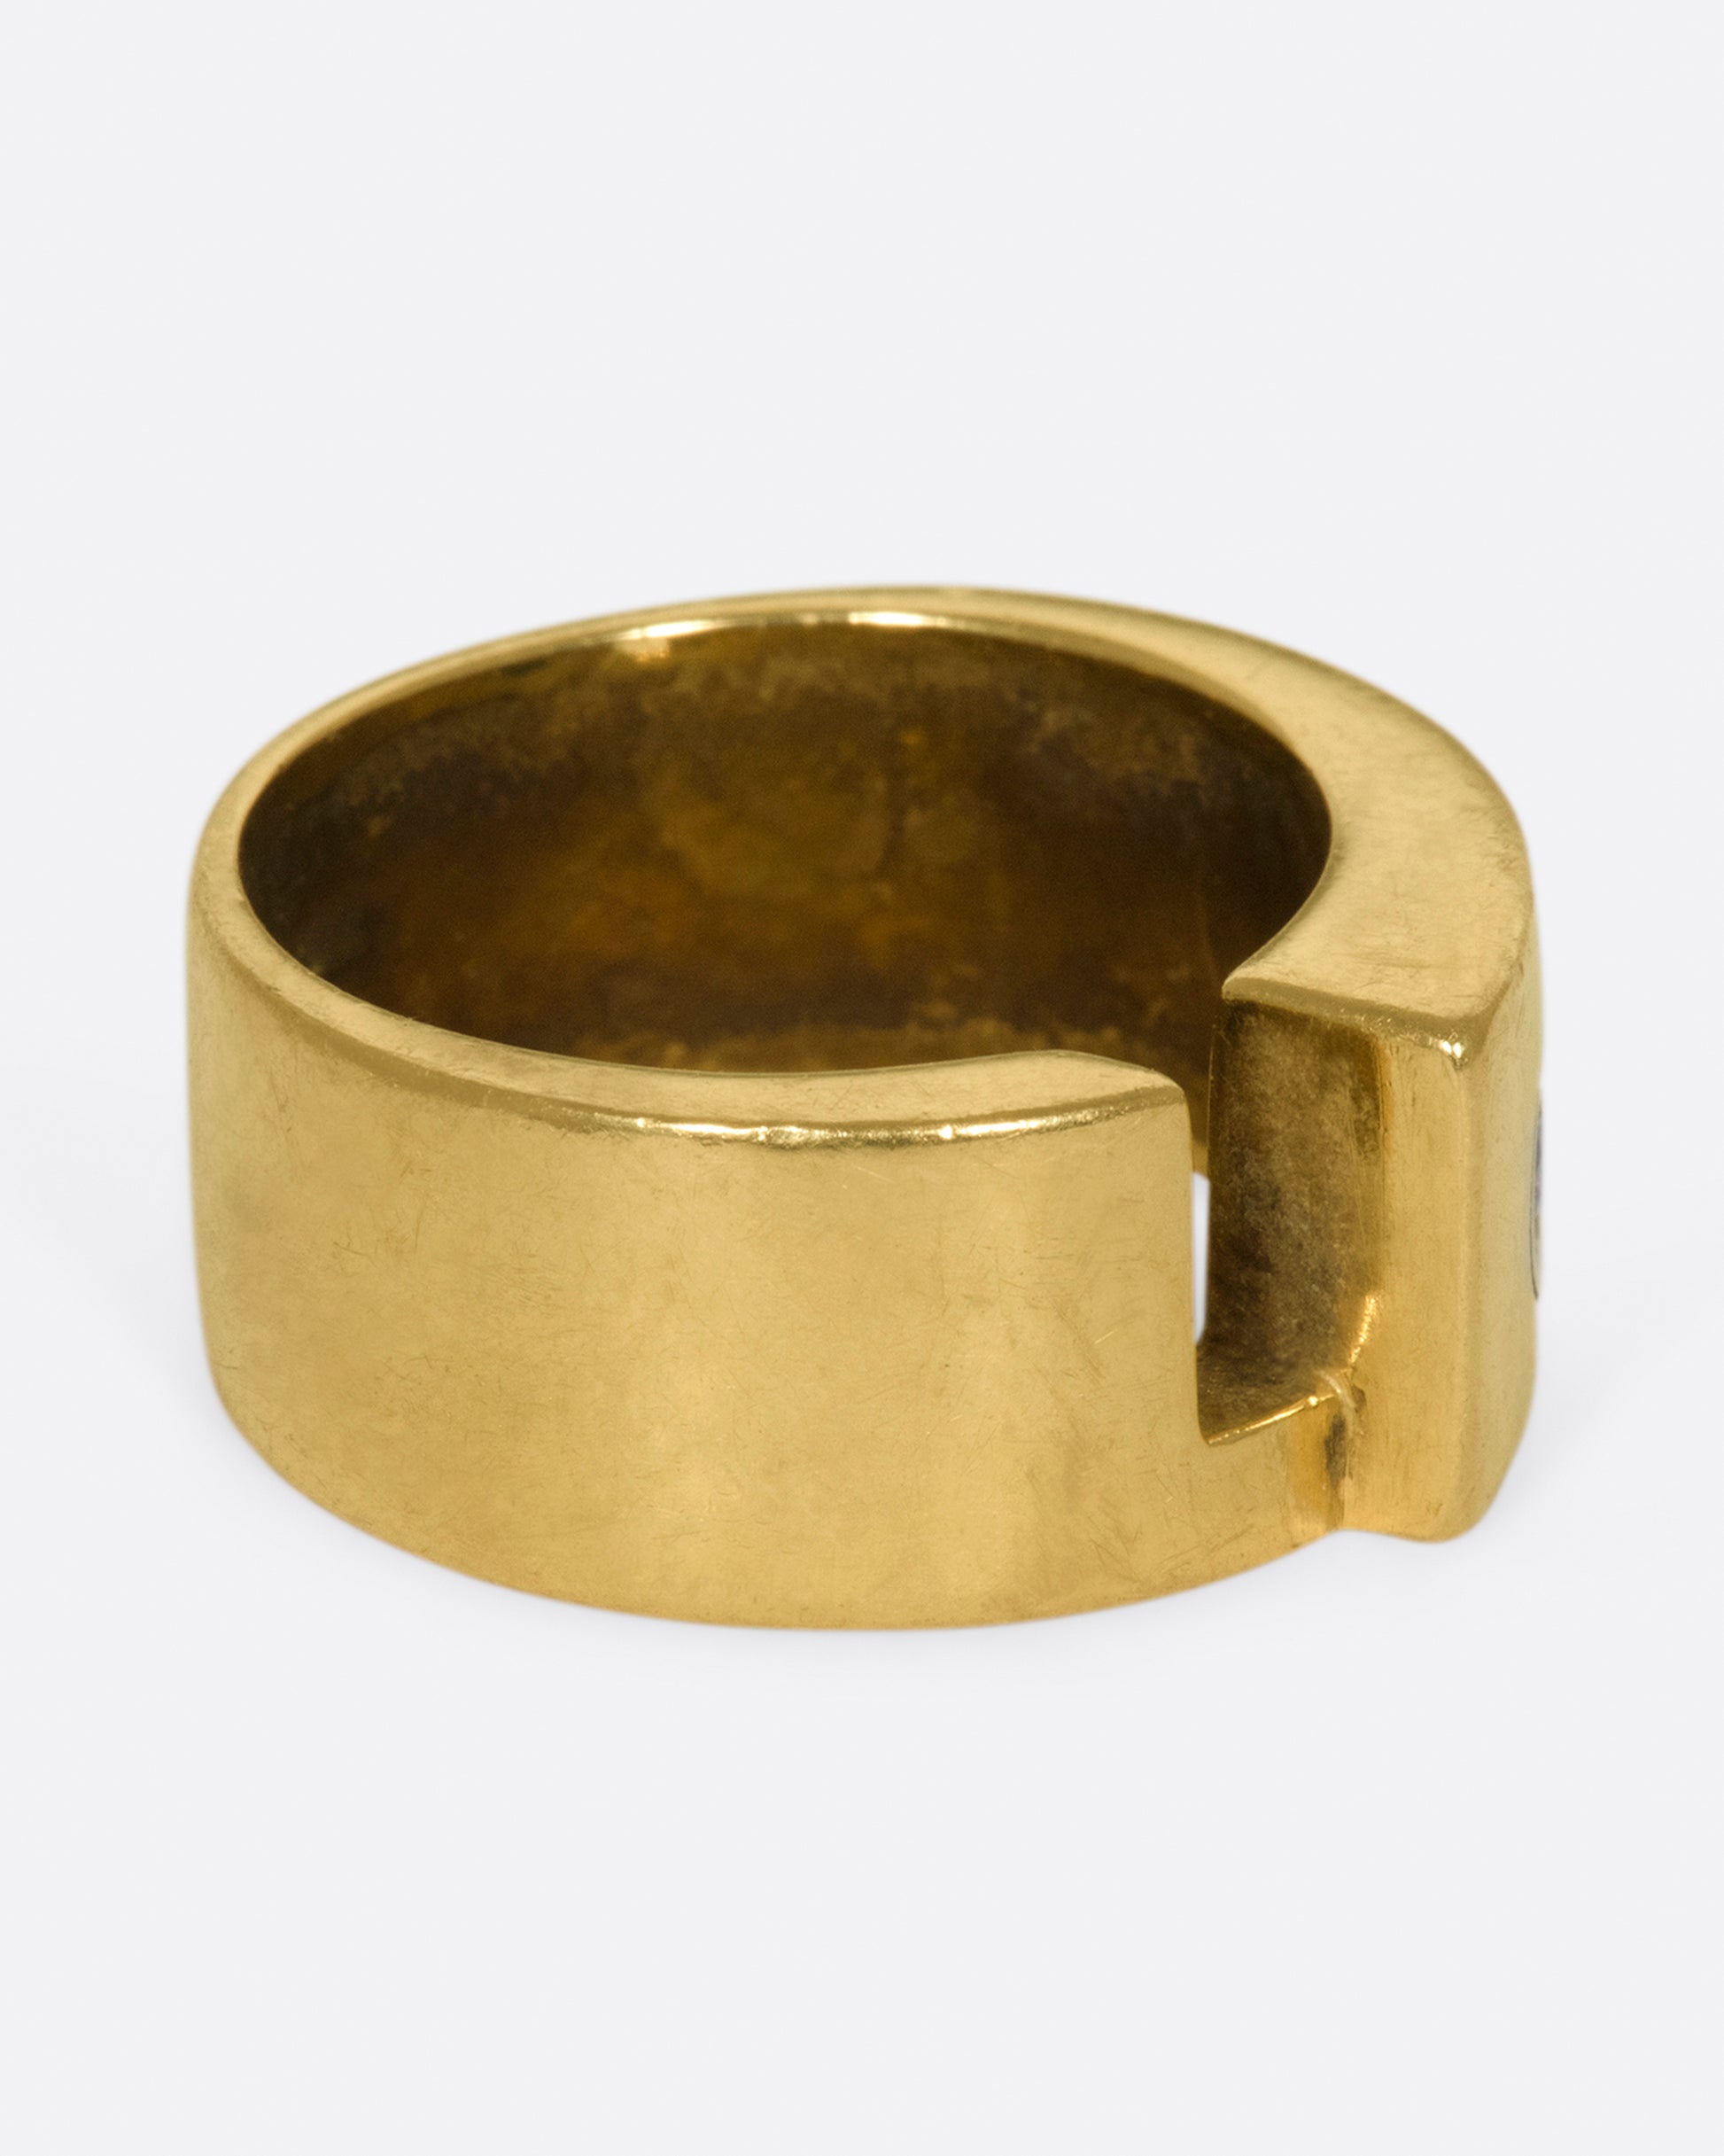 A gold band with a round diamond and rectangular cutout.